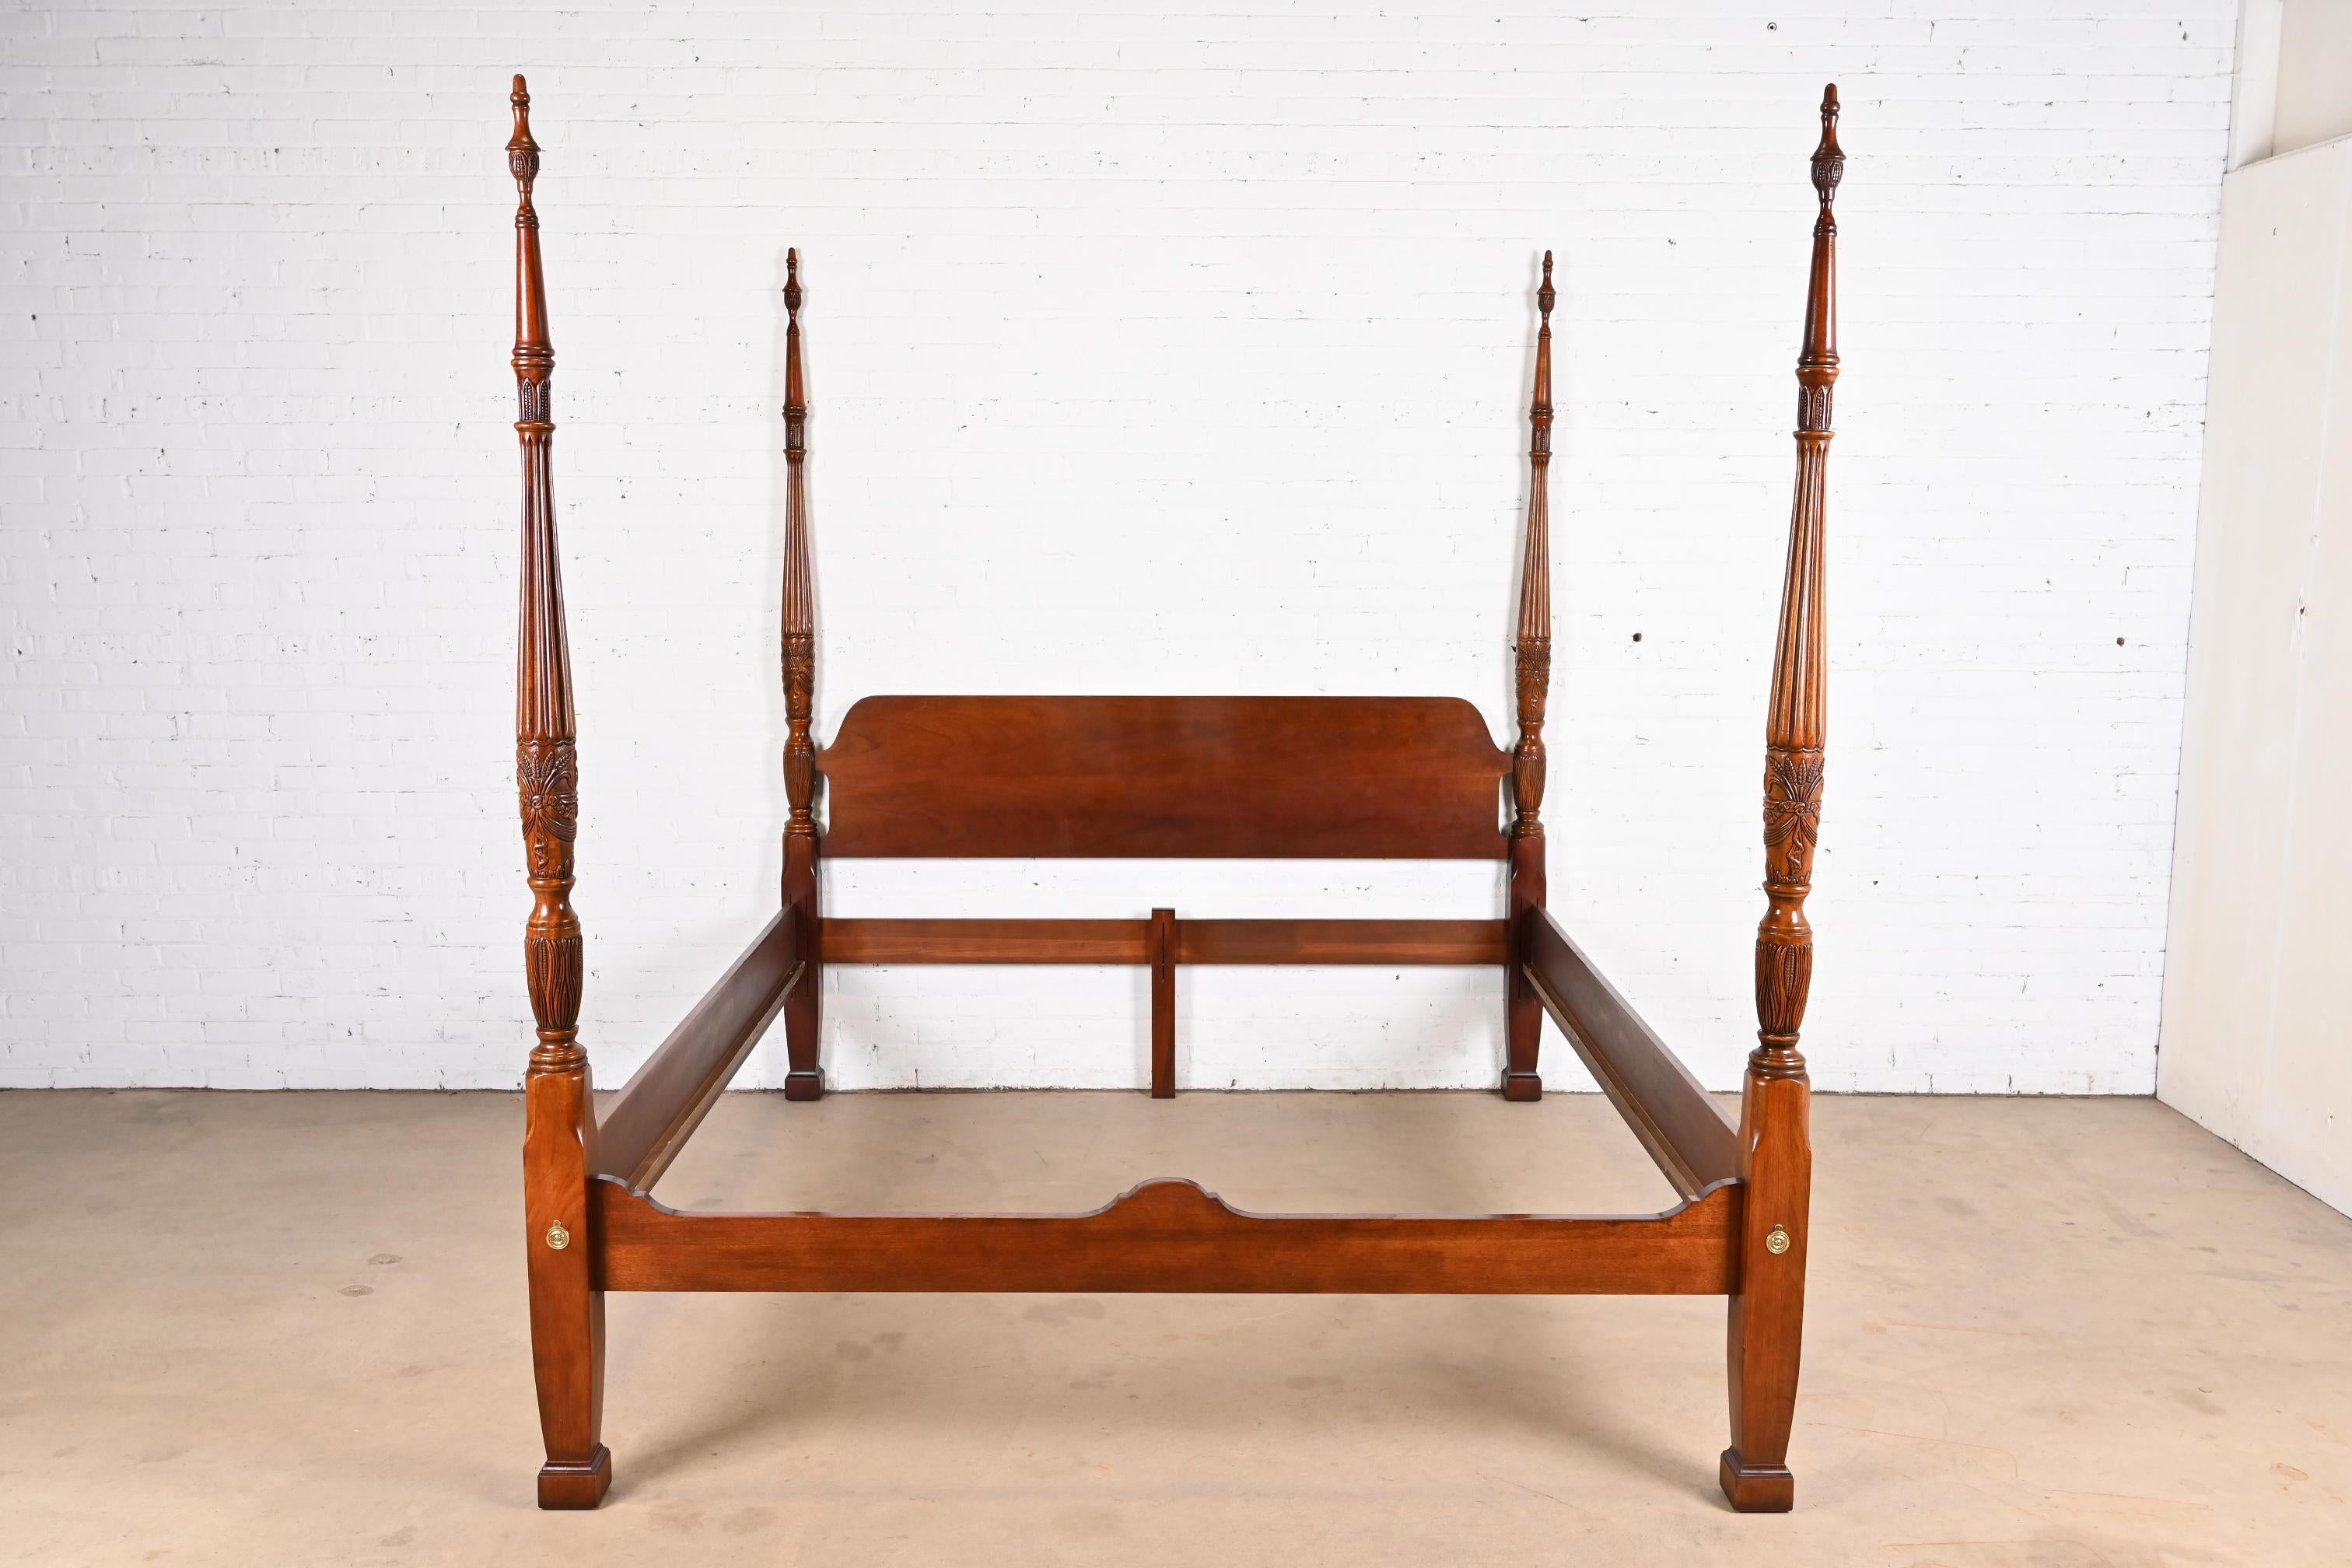 A gorgeous Georgian or Chippendale style four poster king size bed

By Thomasville

USA, Late 20th Century

Carved solid mahogany, with brass accents.

Measures: 79.5